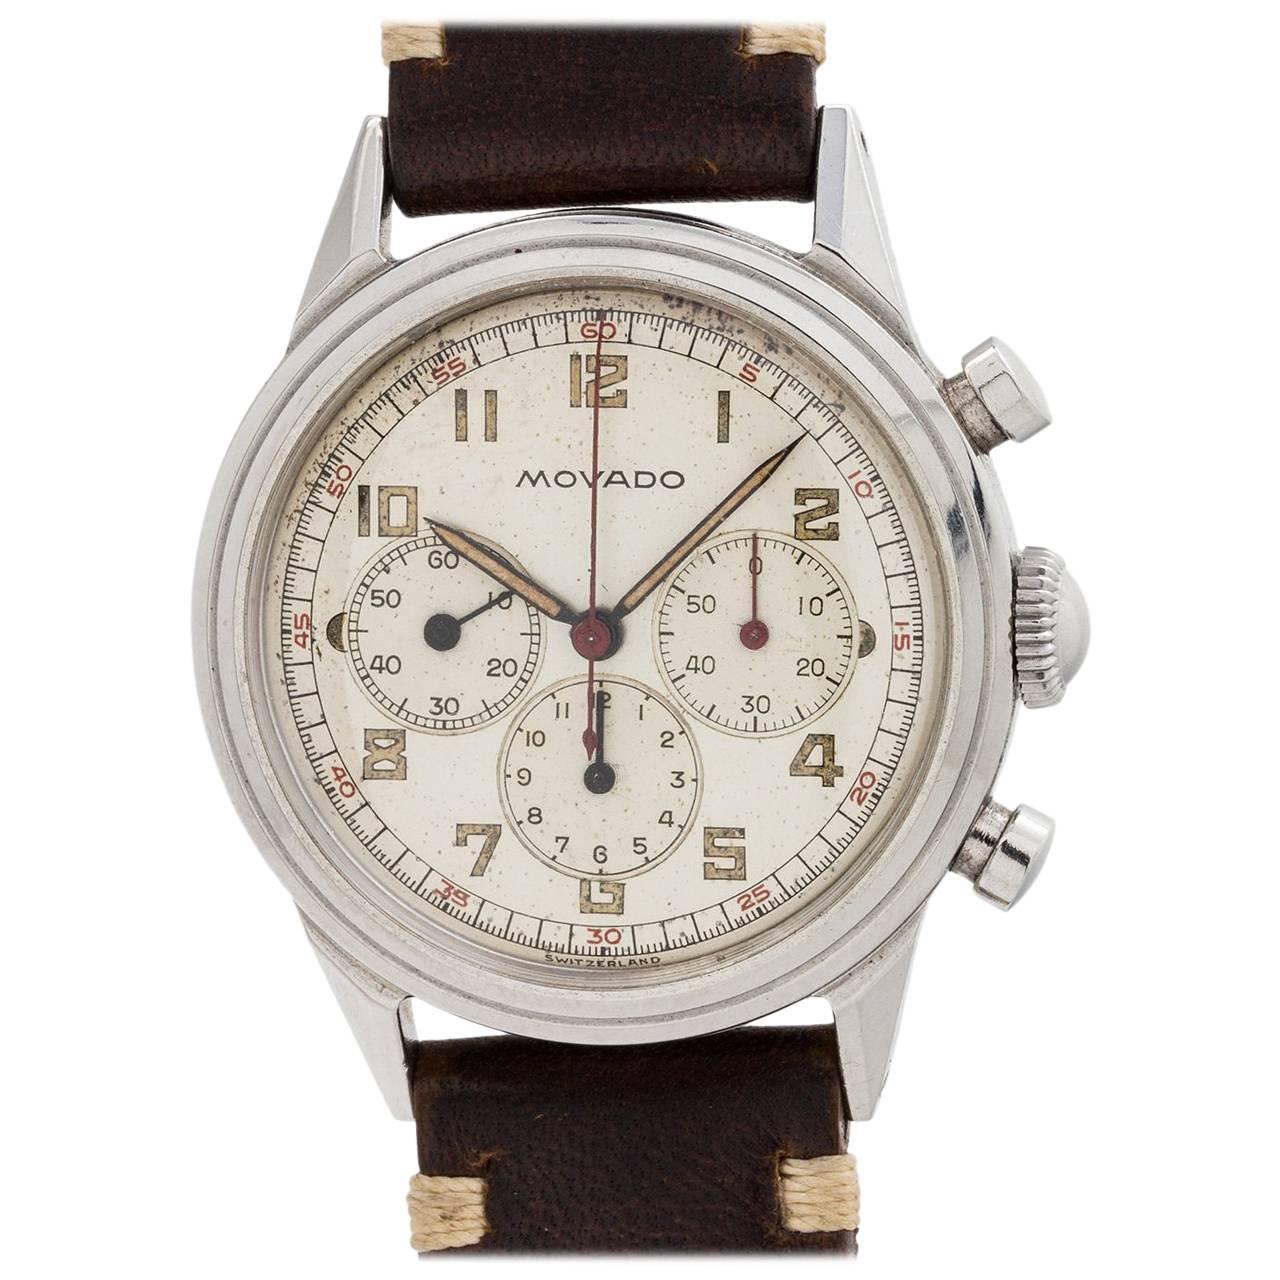 Movado Stainless Steel Chronograph manual wristwatch, circa 1950s